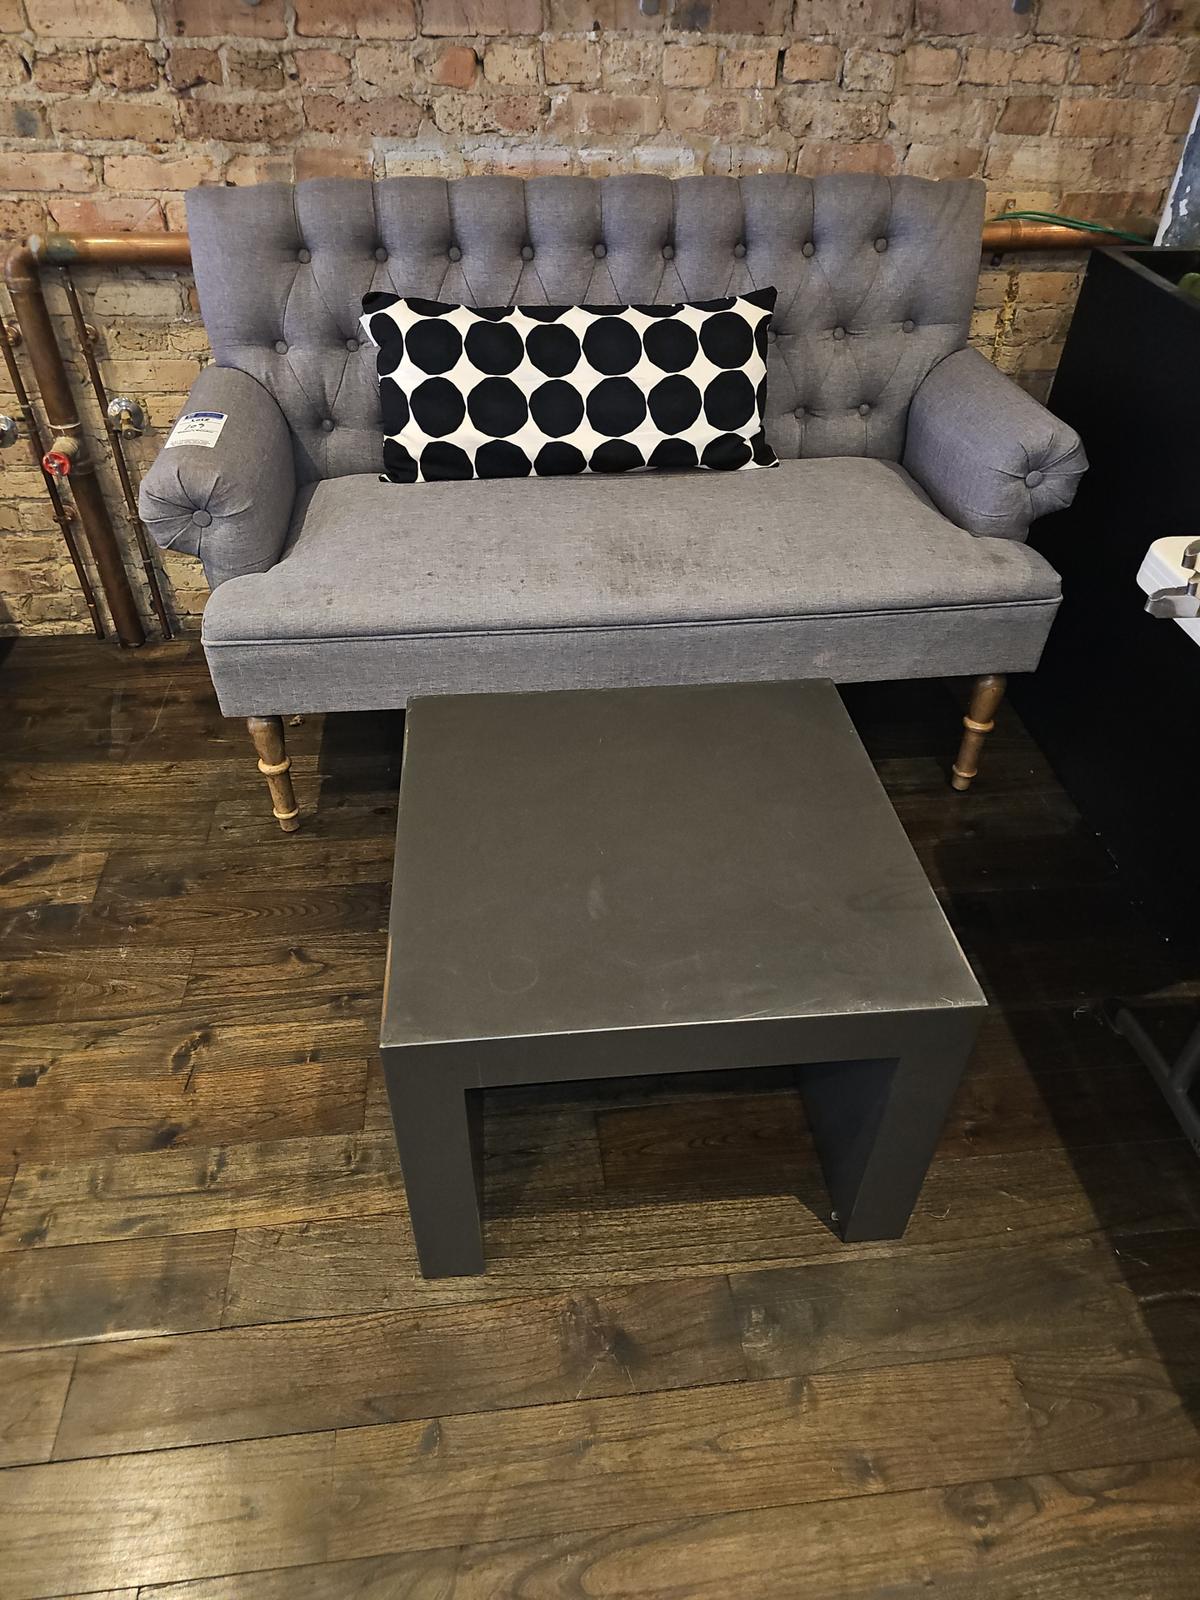 5' Couch with metal 2' x 2' table